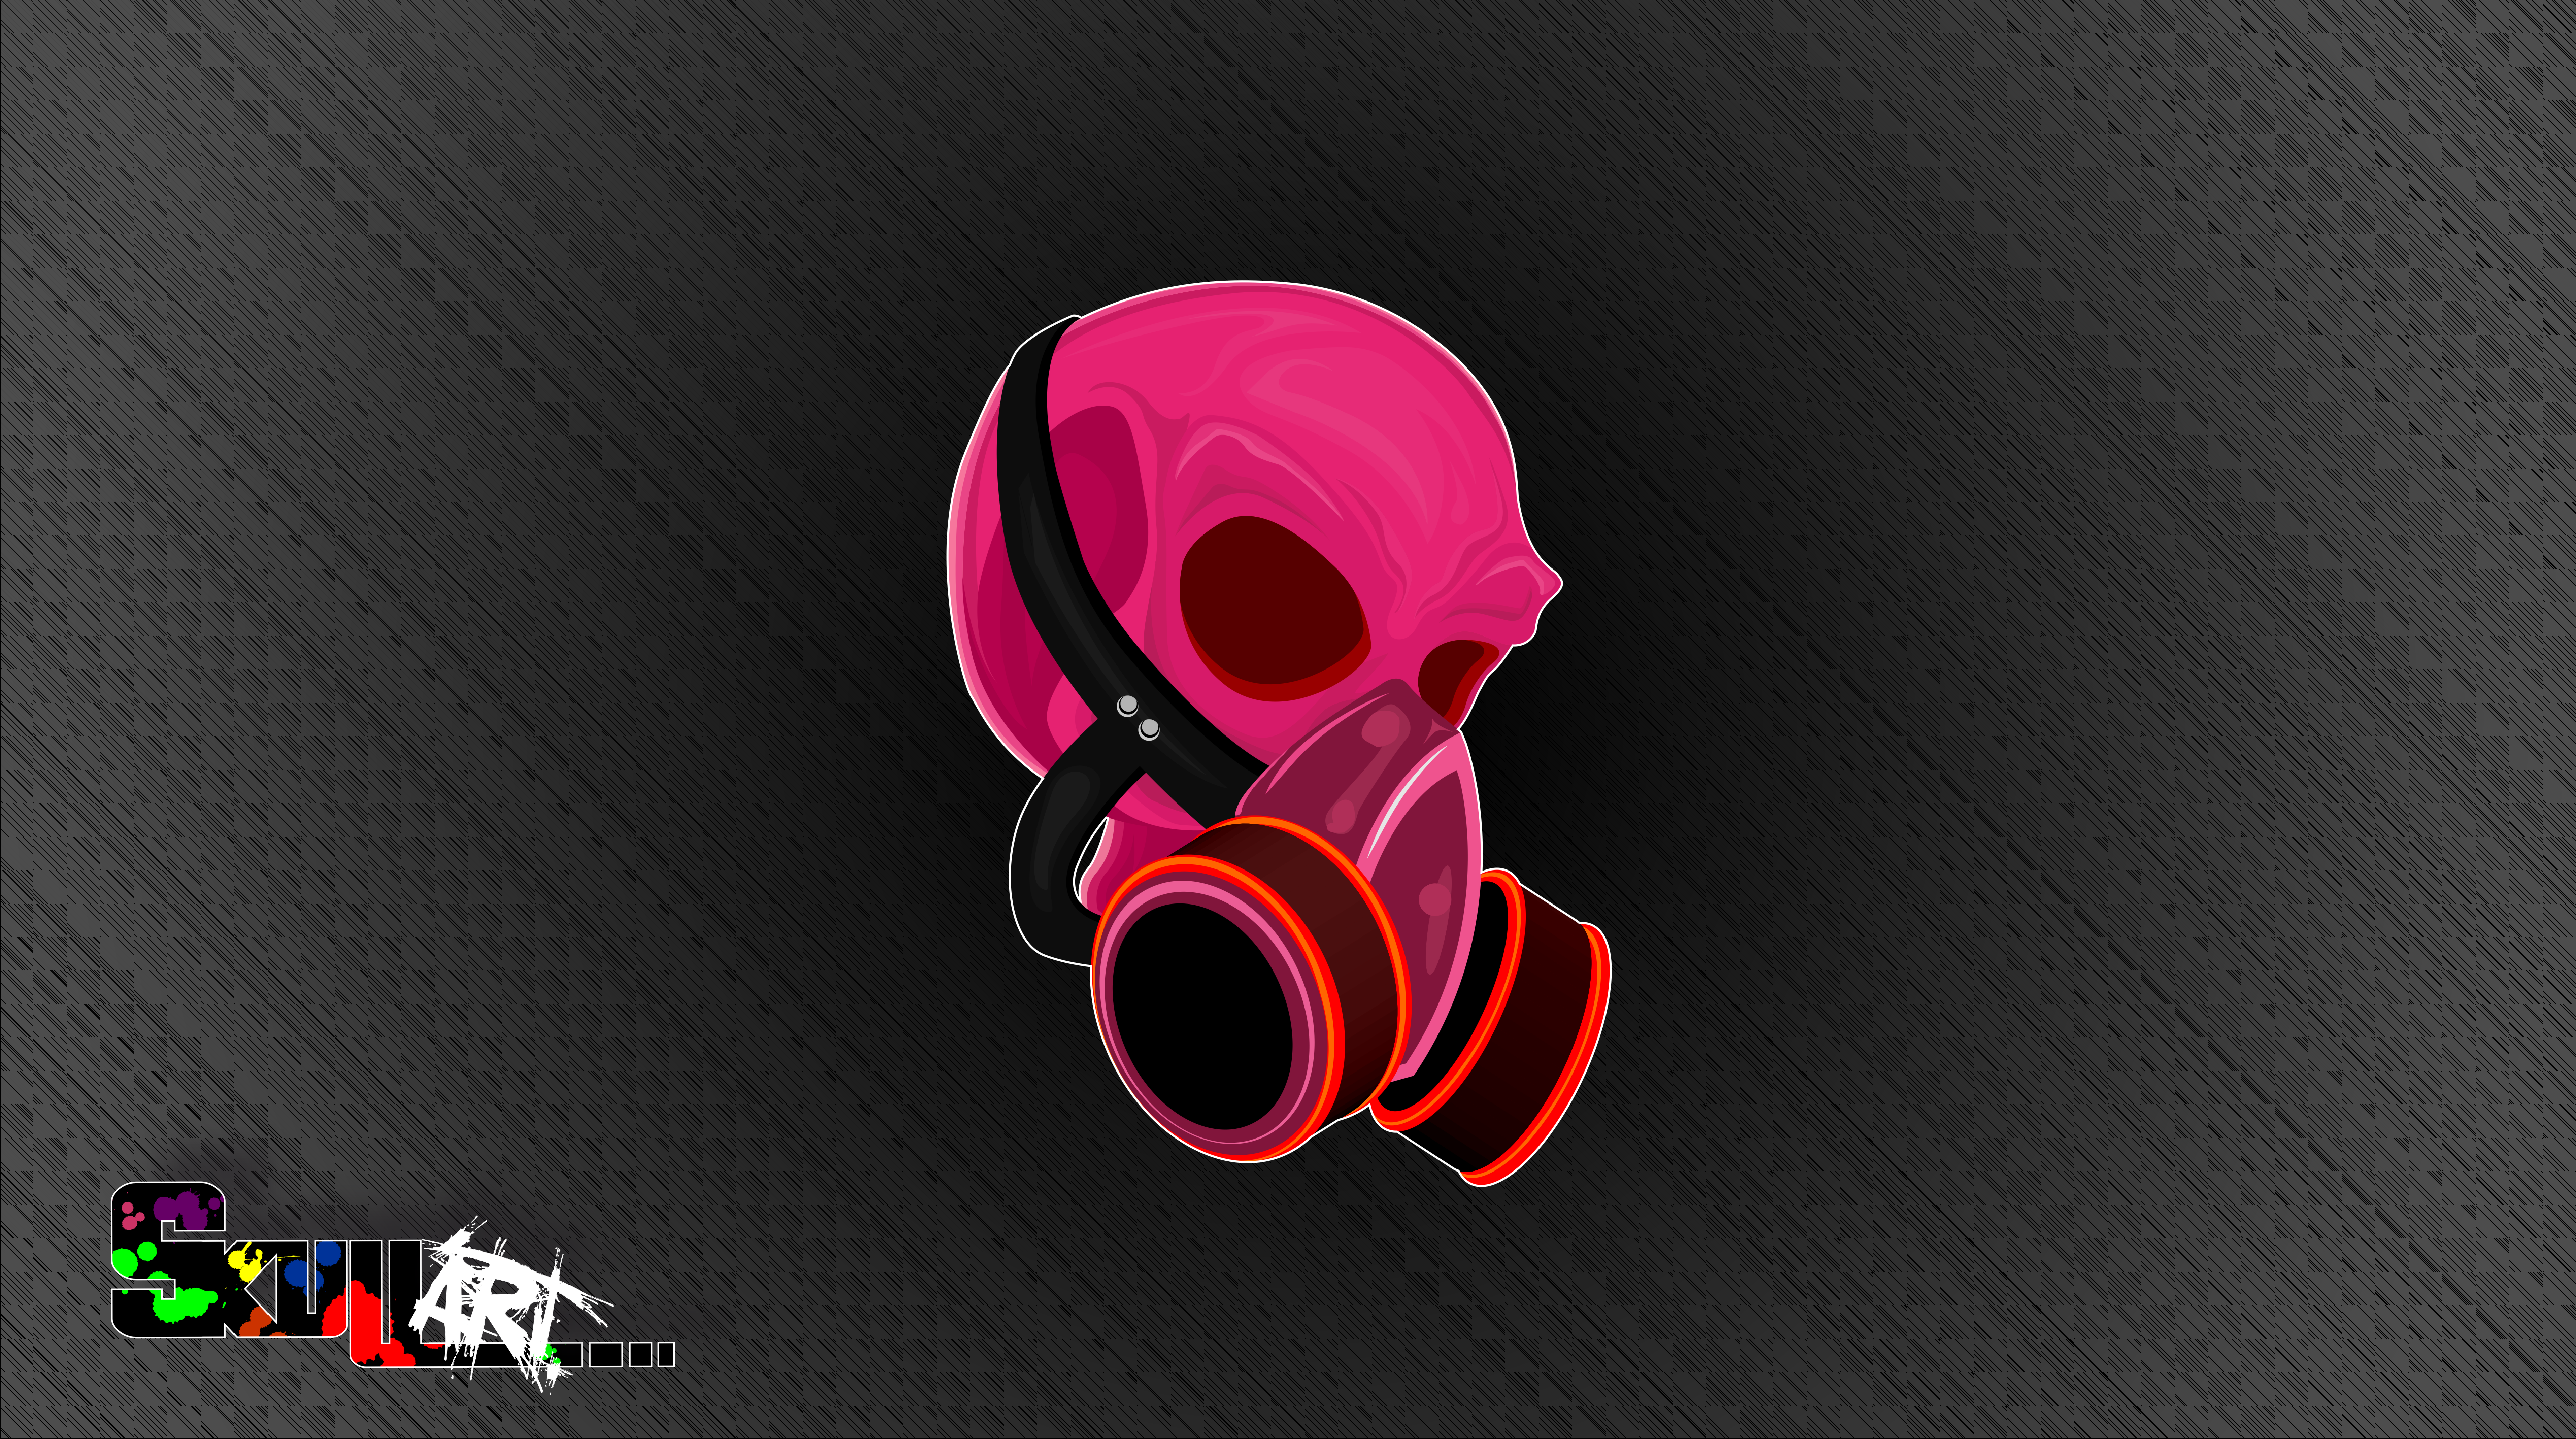 Skull Face Mask Colorful 5075x2835